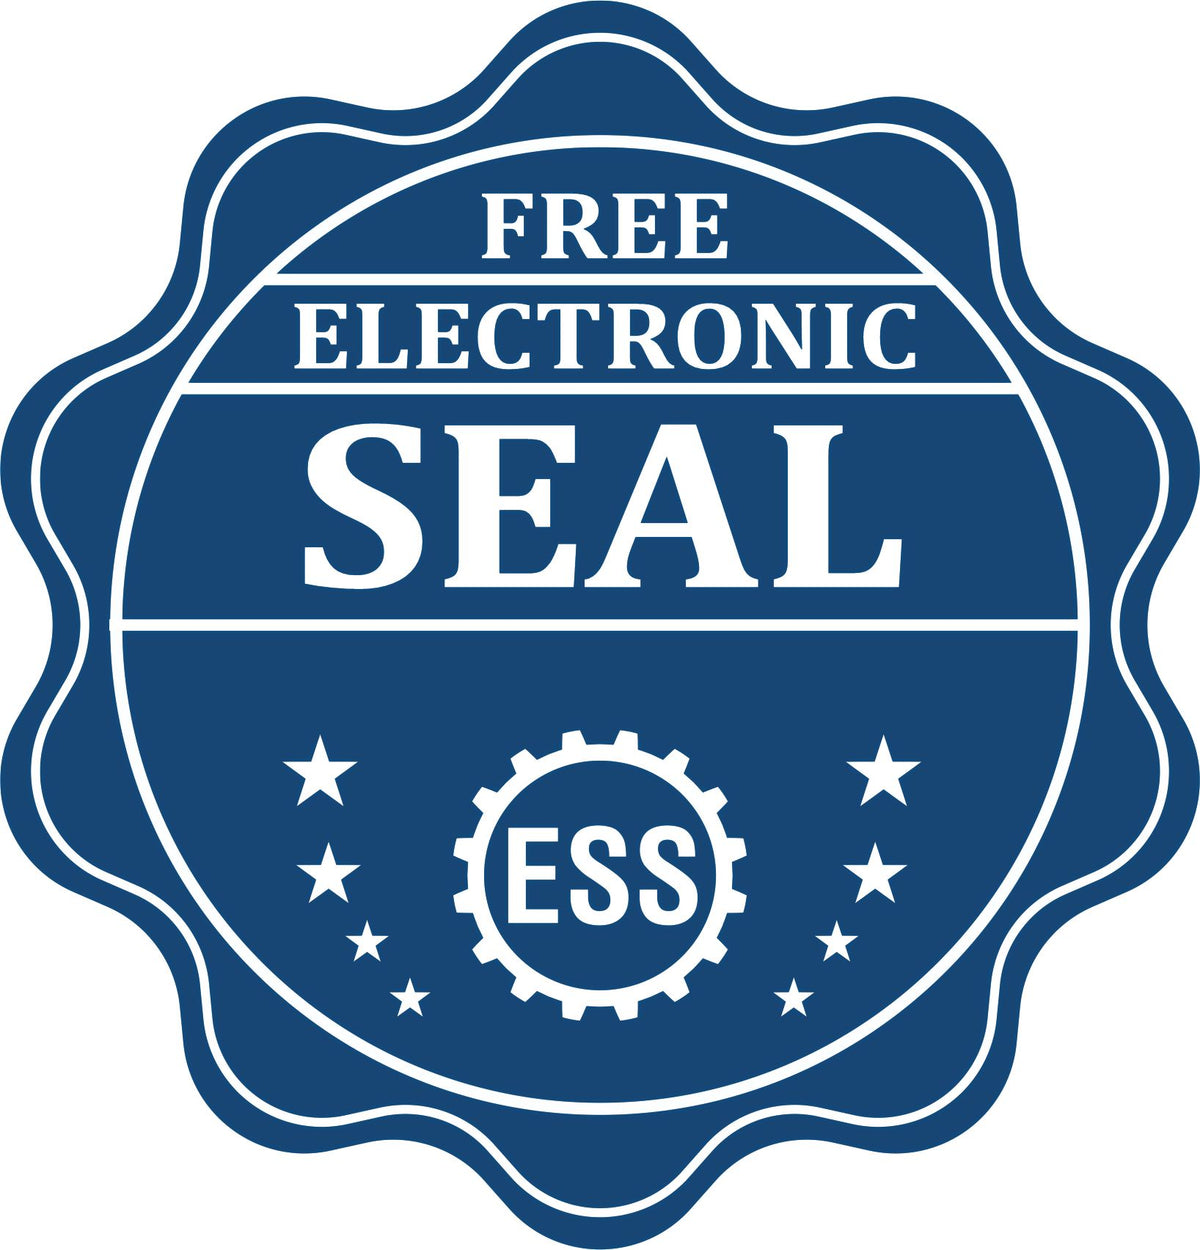 A badge showing a free electronic seal for the Hybrid Connecticut Geologist Seal with stars and the ESS gear on the emblem.